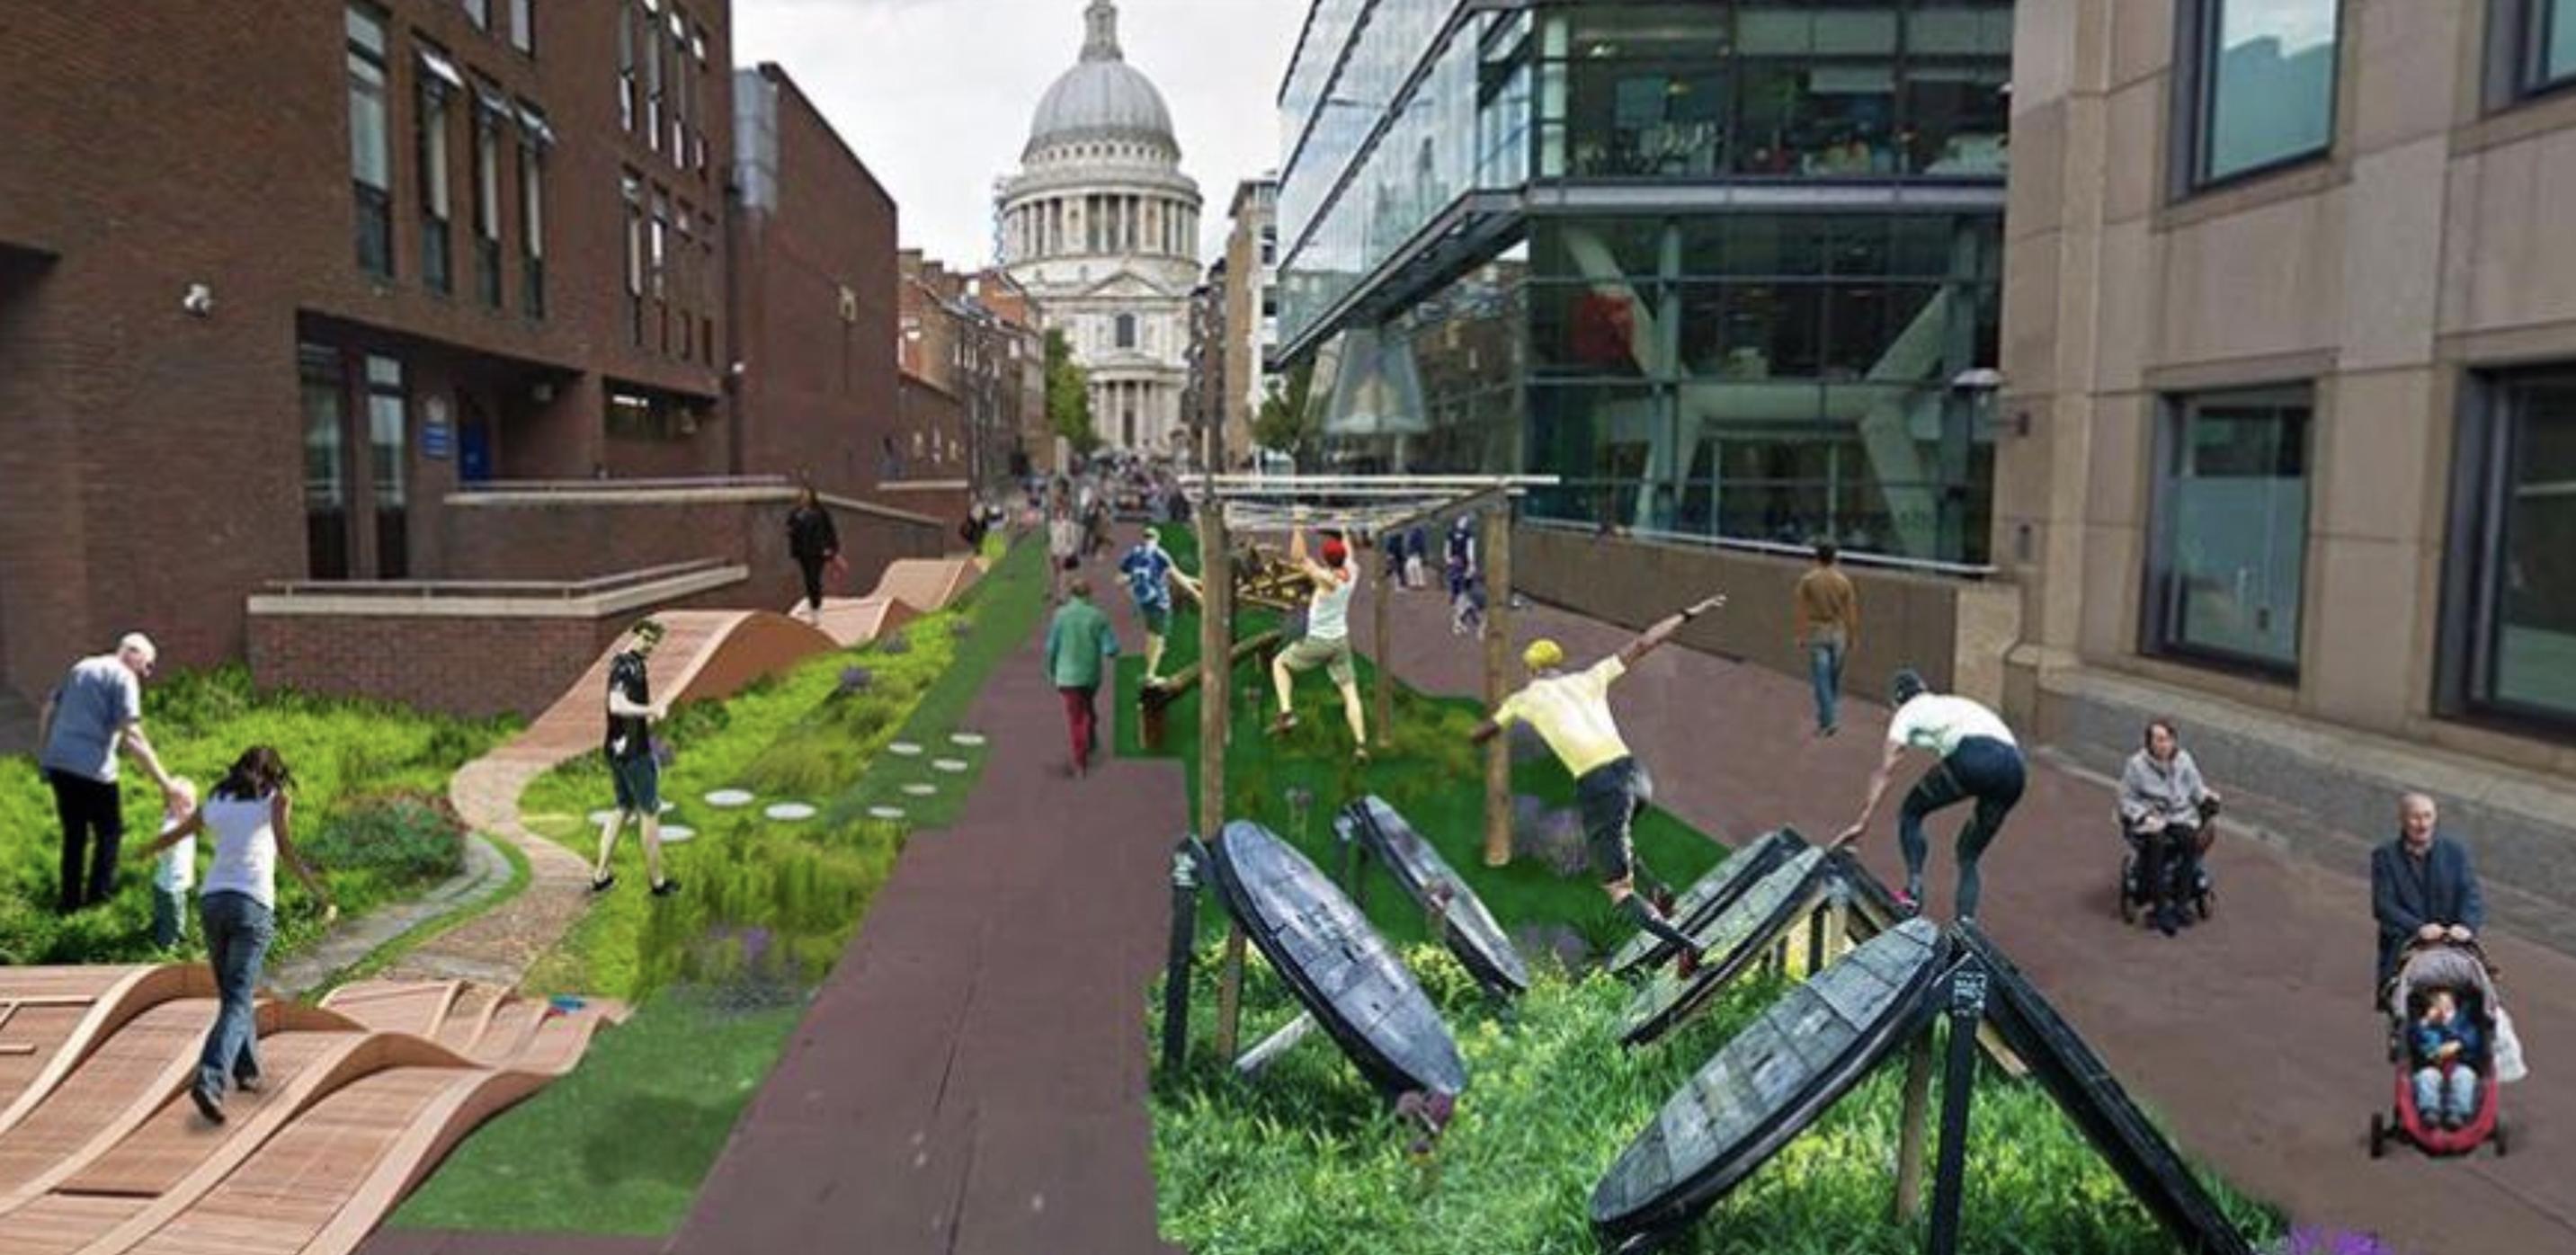 Collage imagining a challenging `Active Urbanism` route applied to Sermon Lane in London. Credit: Anna Boldina